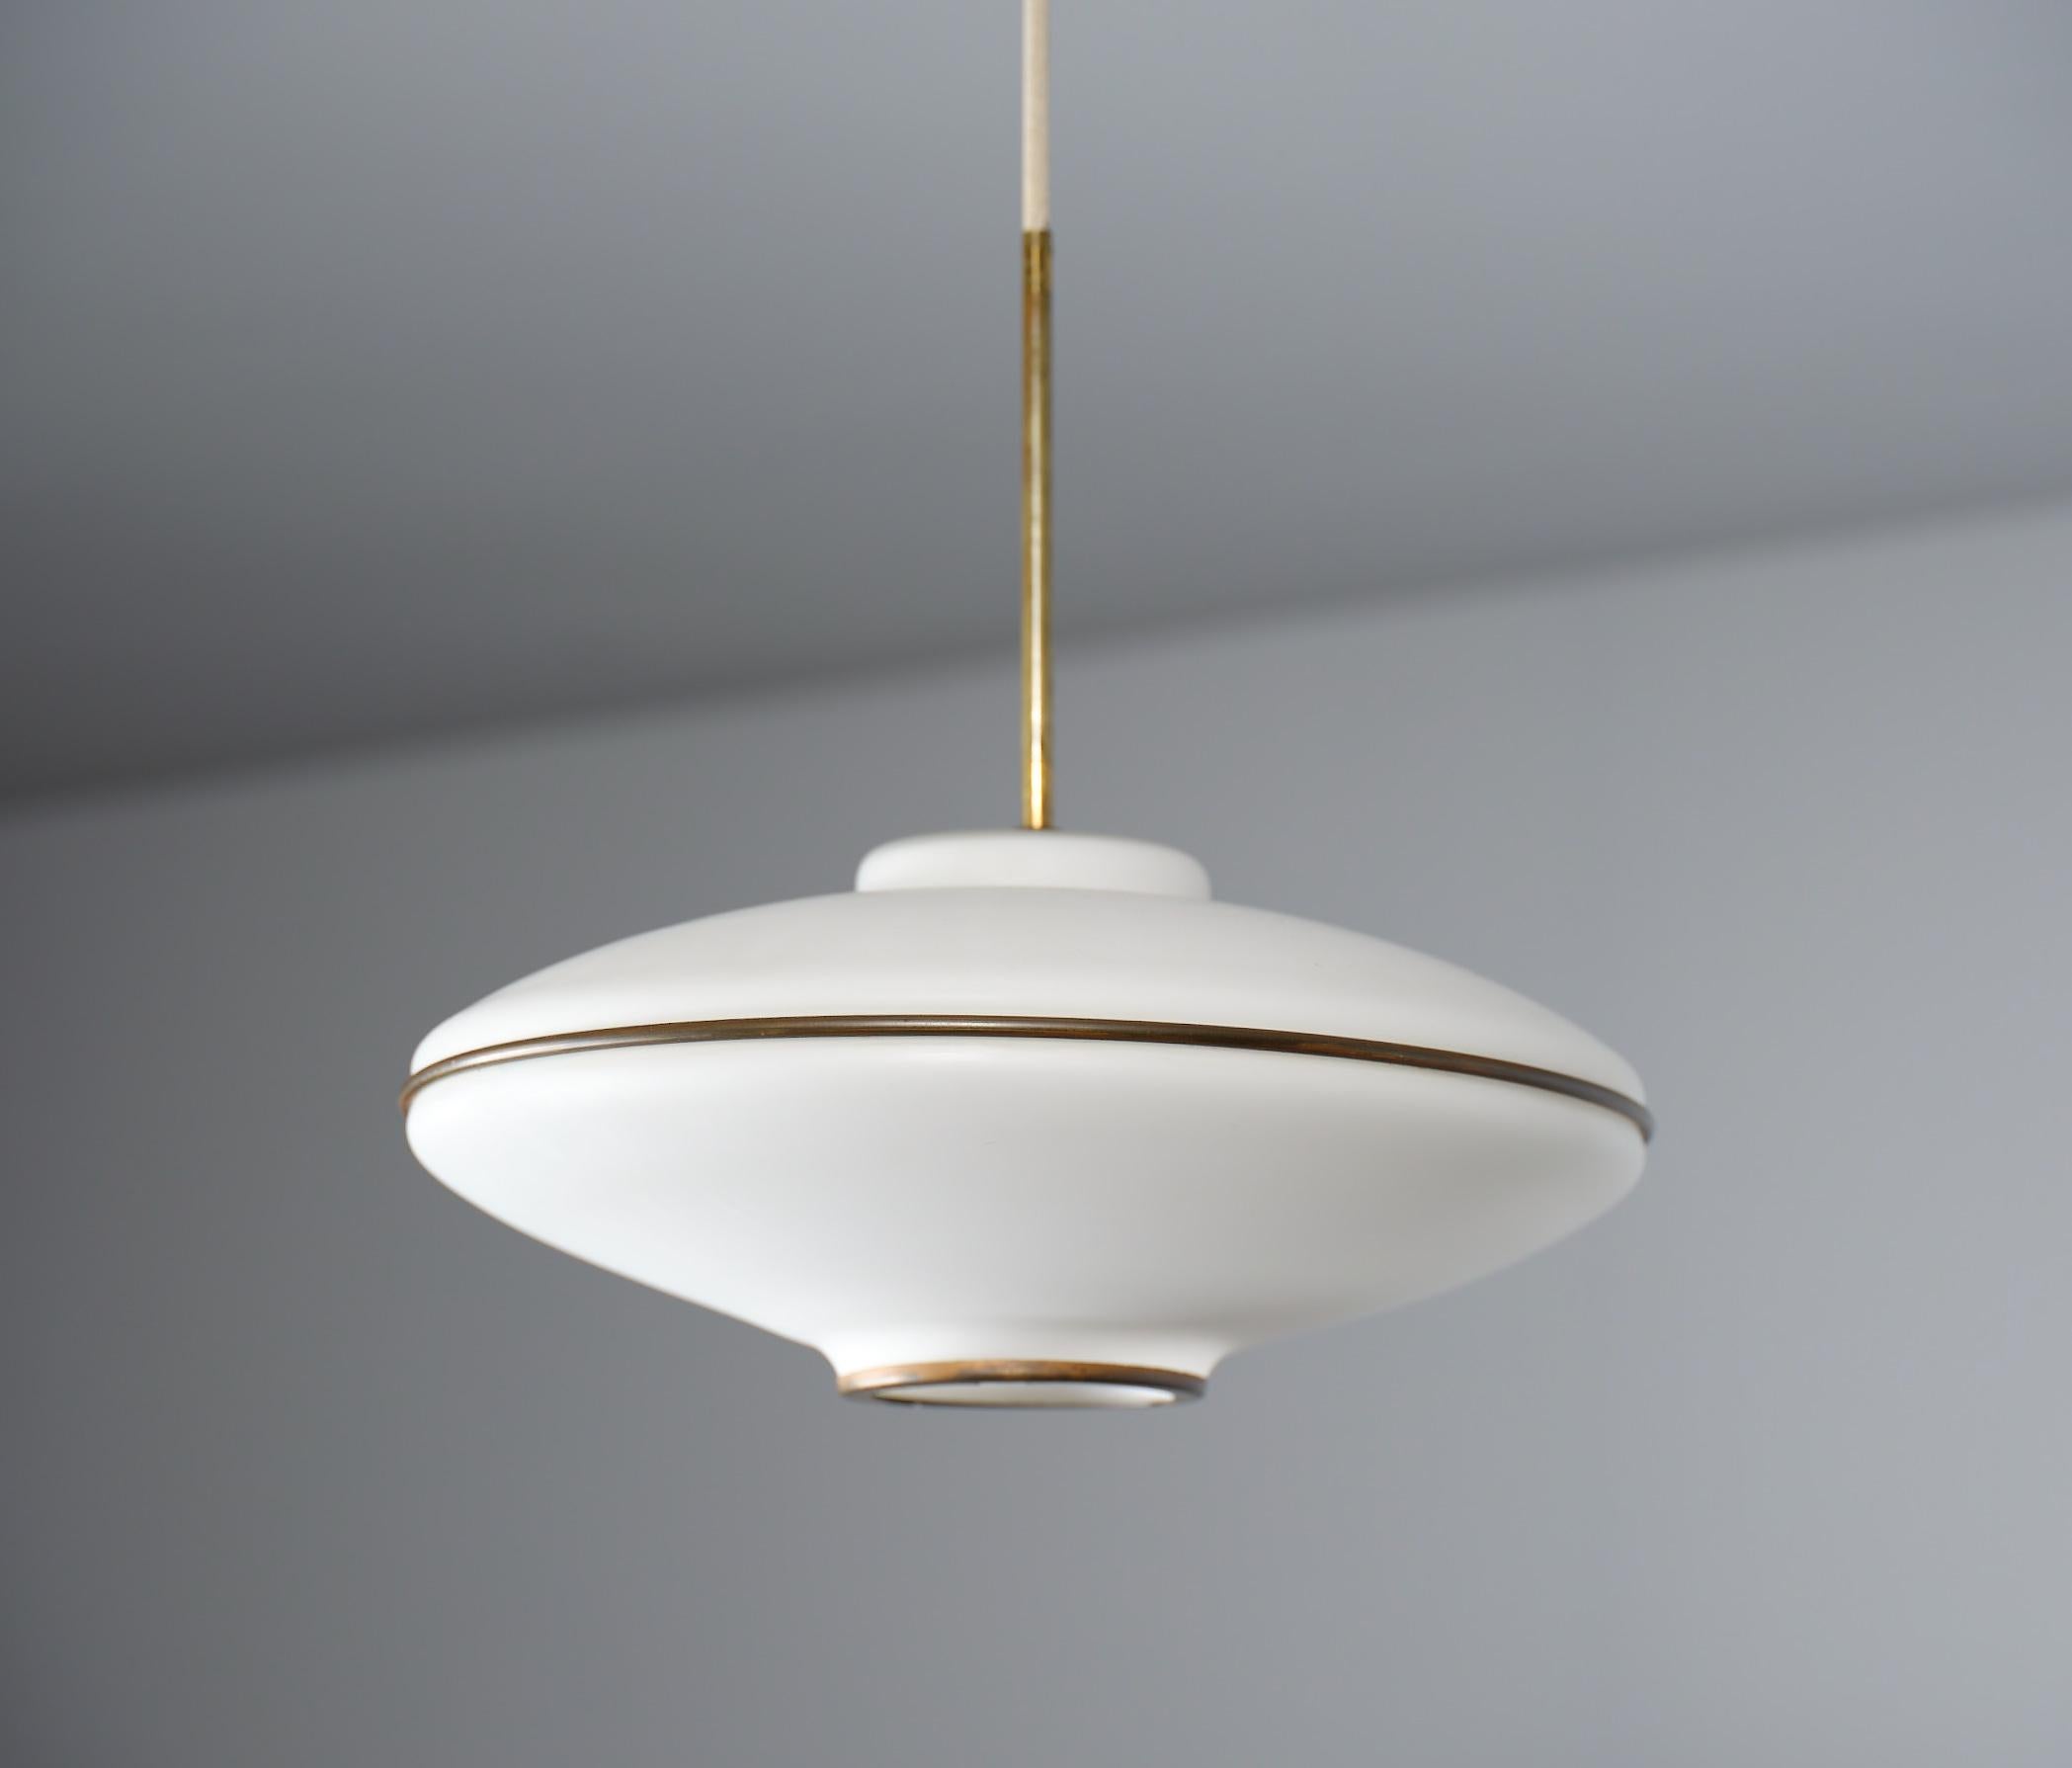  Italian-designed pendant lamp, a timeless piece crafted in Italy during the 1950s. Featuring a sleek modern design reminiscent of a flying saucer, it boasts a large opaline glass shade accented with brass details and cream/beige lacquered metal